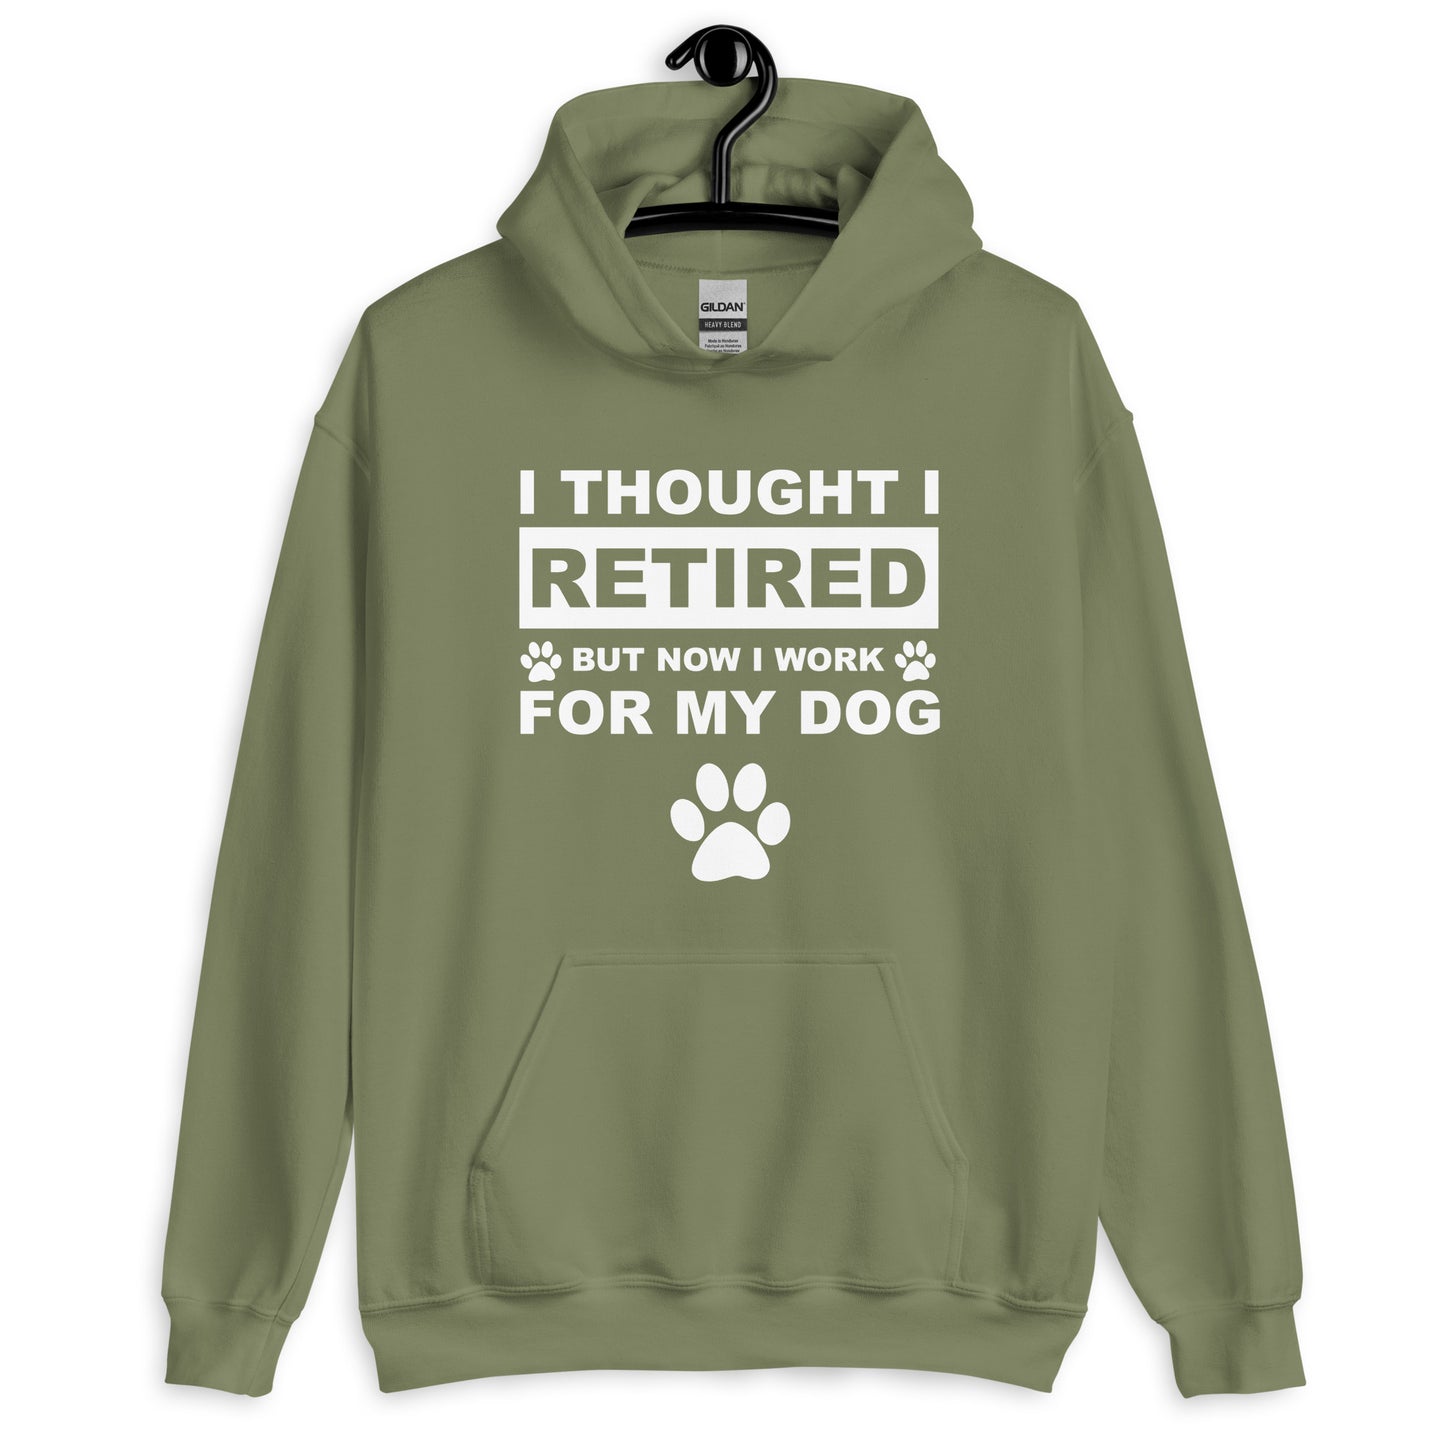 I Thought I Retired But Now I Work for My Dog Hoodie